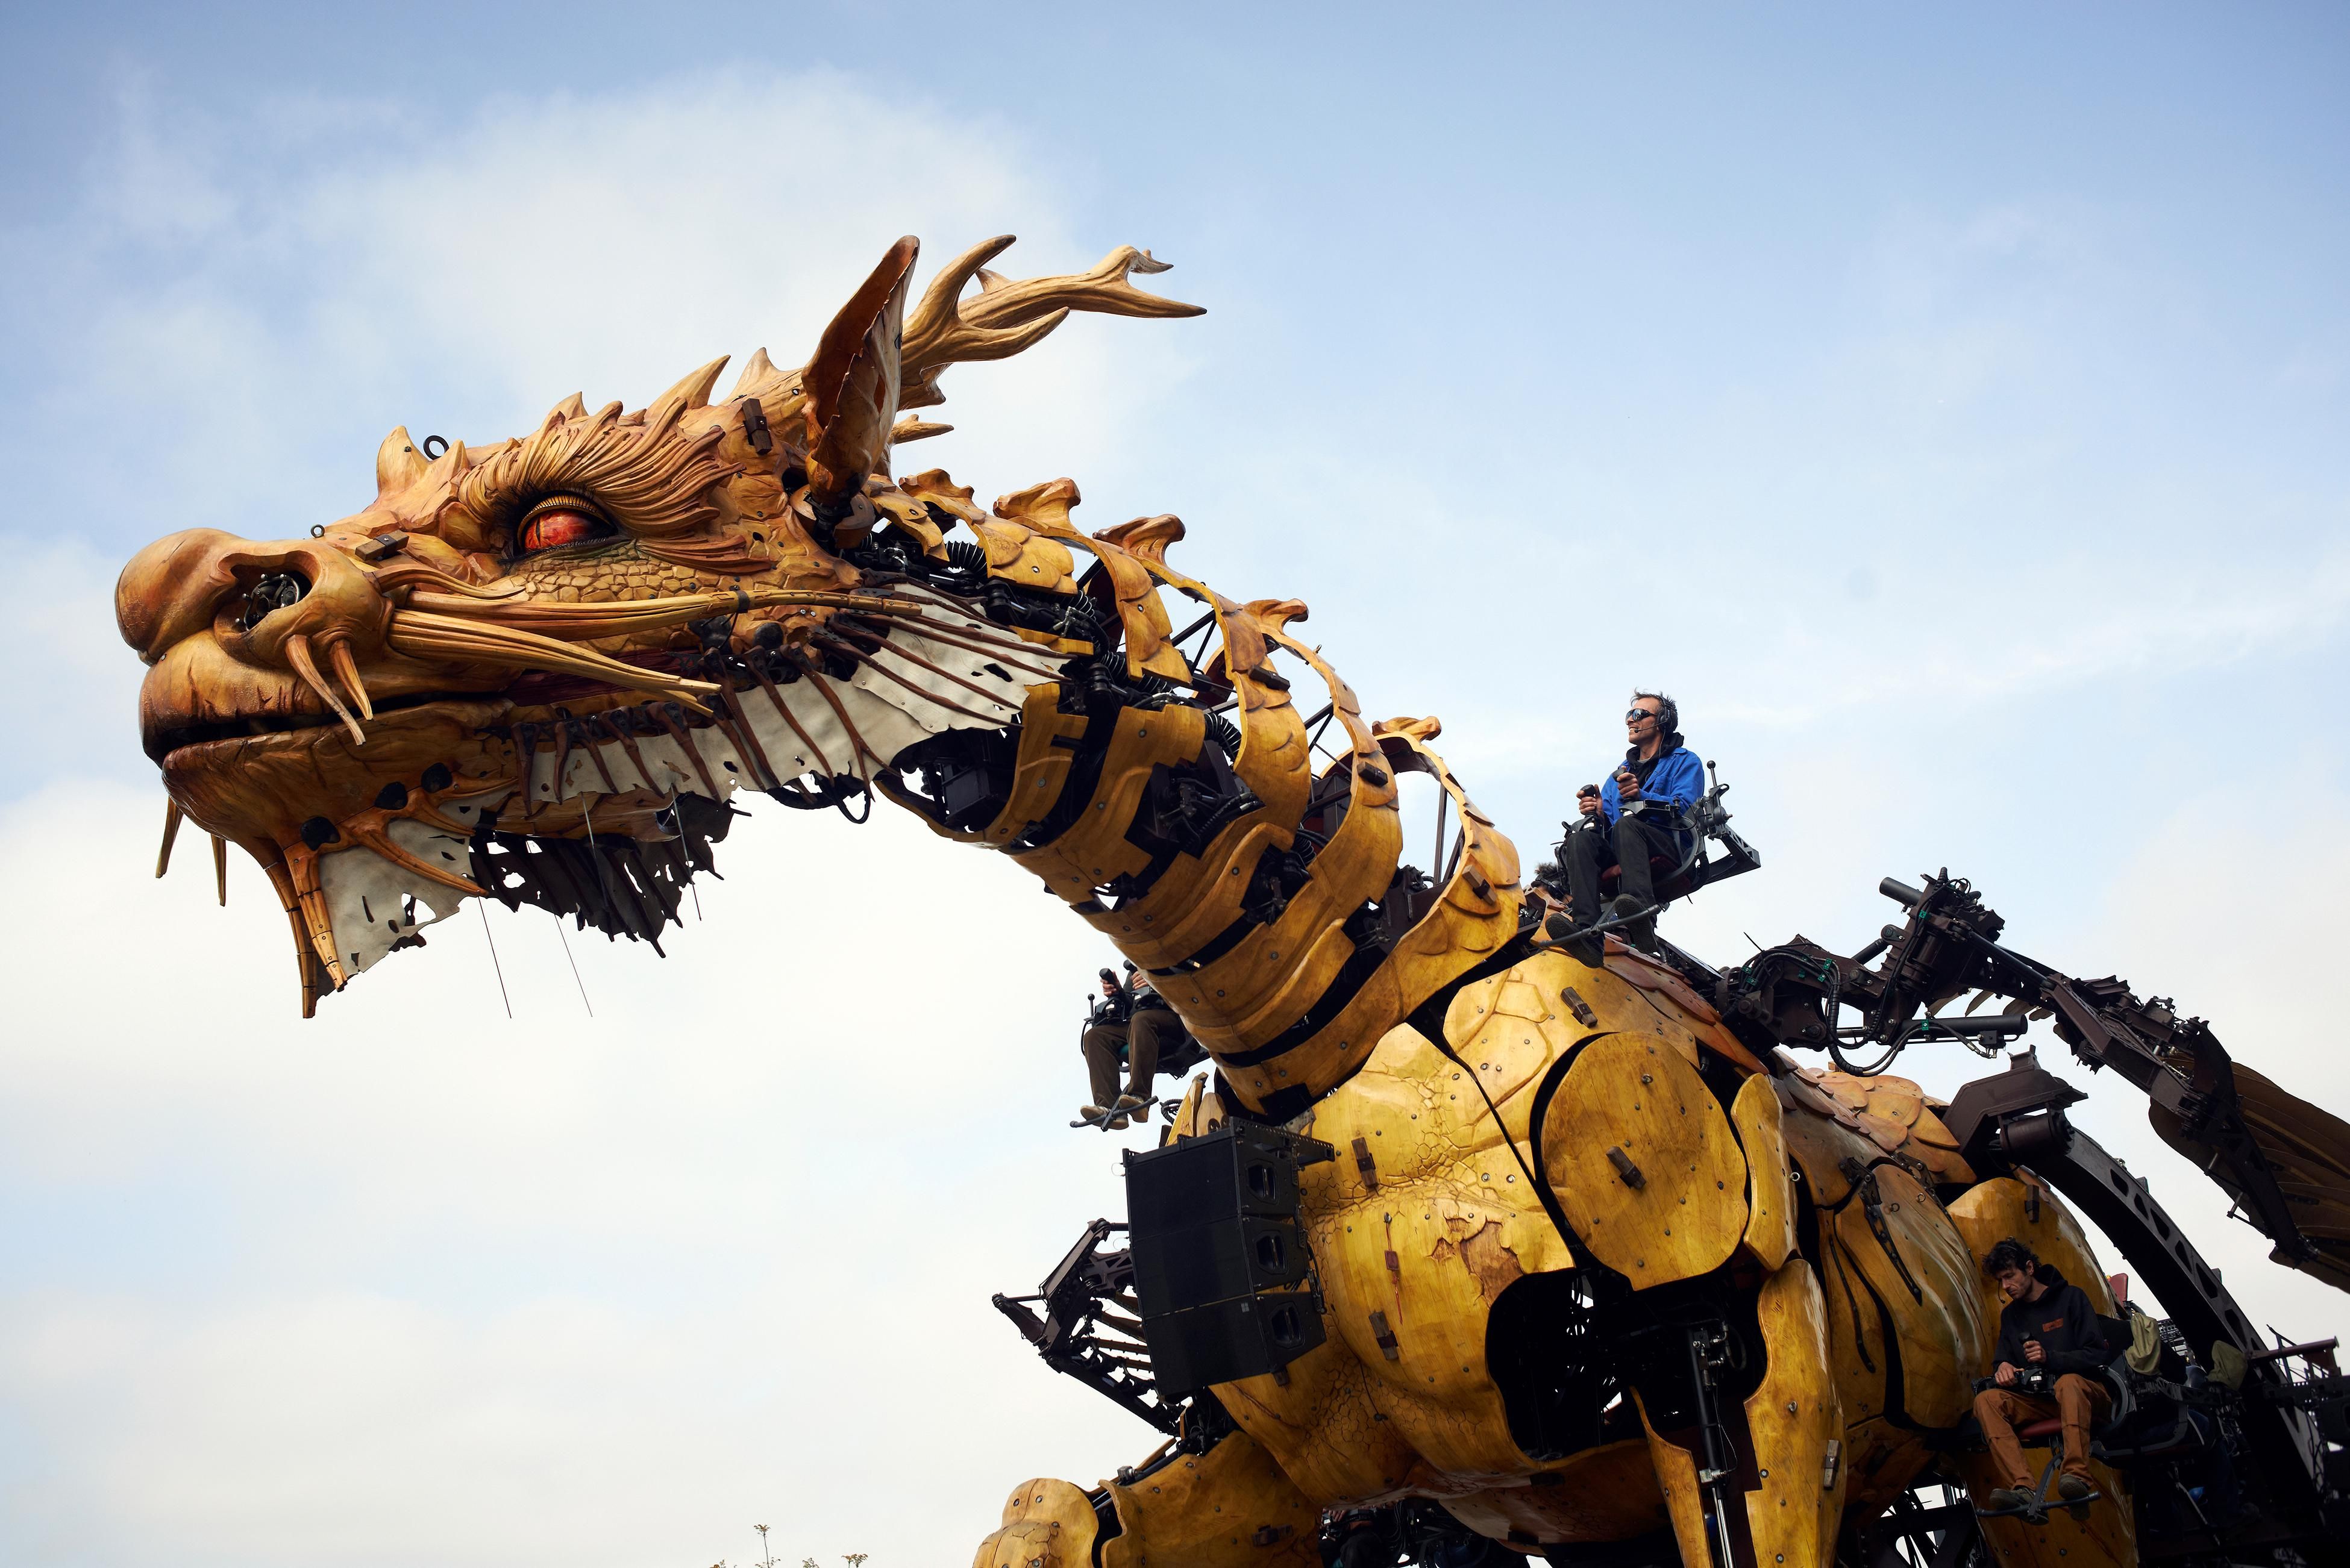 Image of a robotic dragon with a man on top of the dragon.